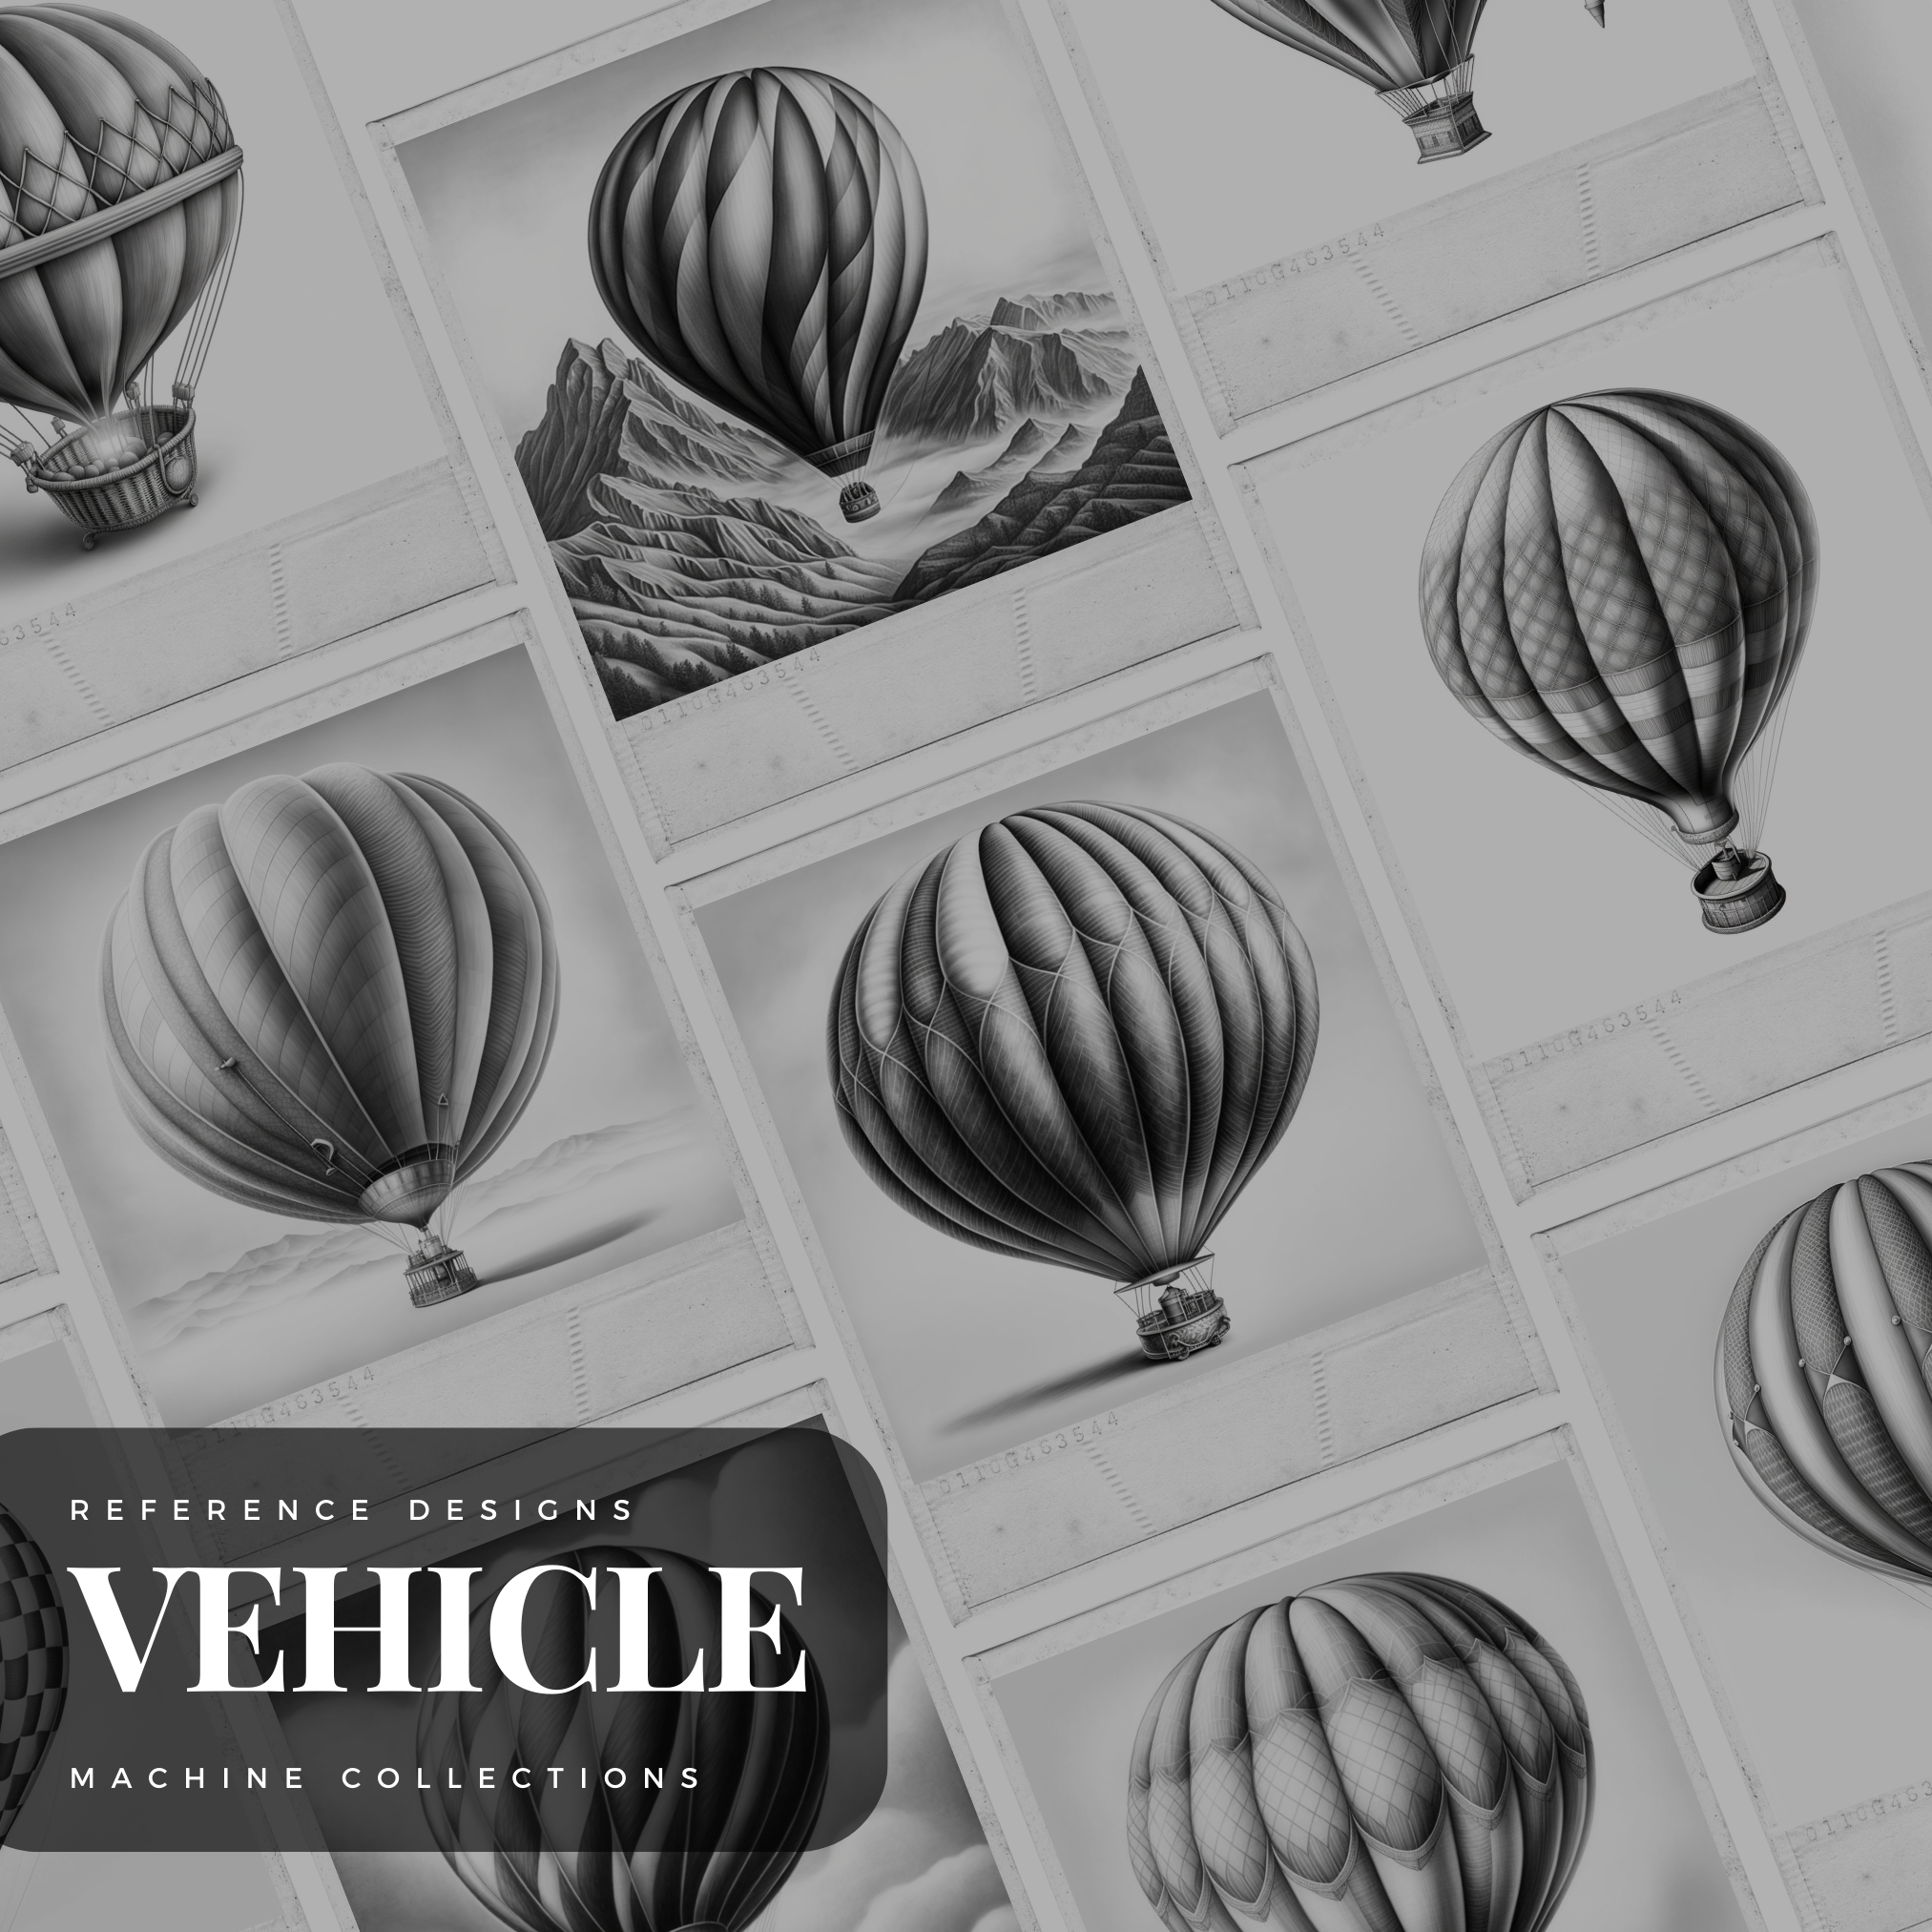 Hot Air Balloons Digital Design Collection: 50 Procreate & Sketchbook Images